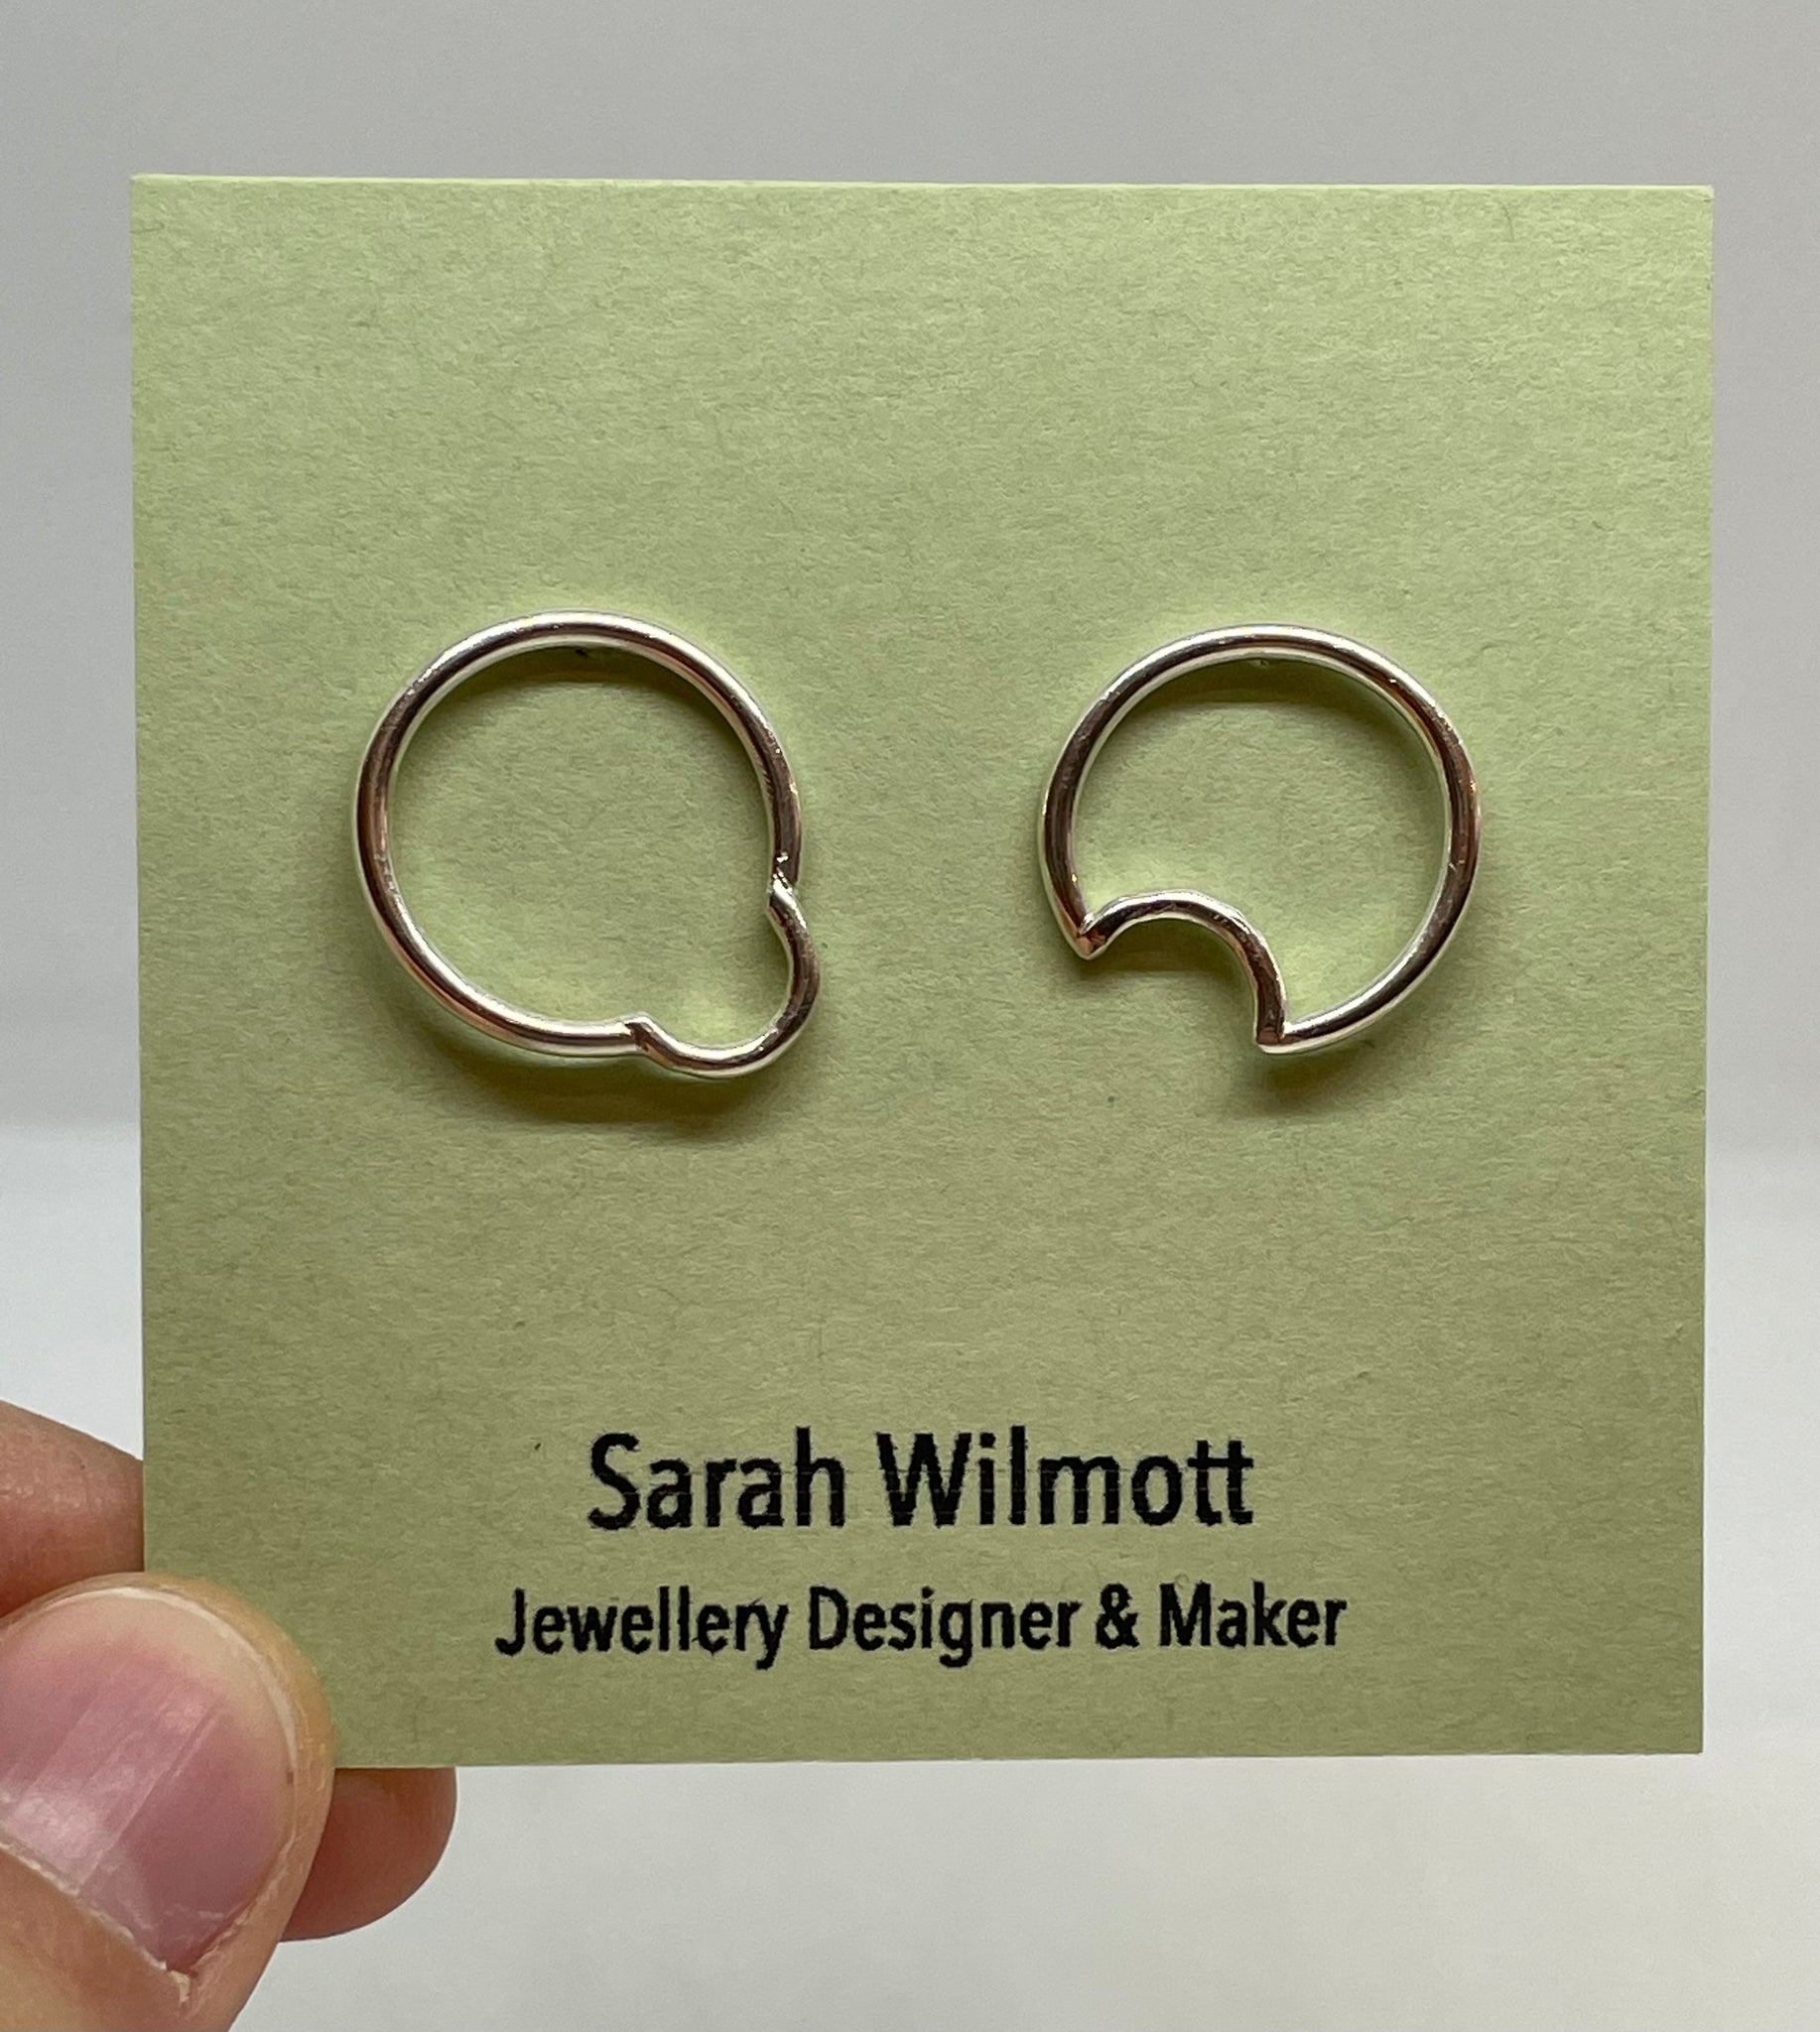 In and Out Earrings